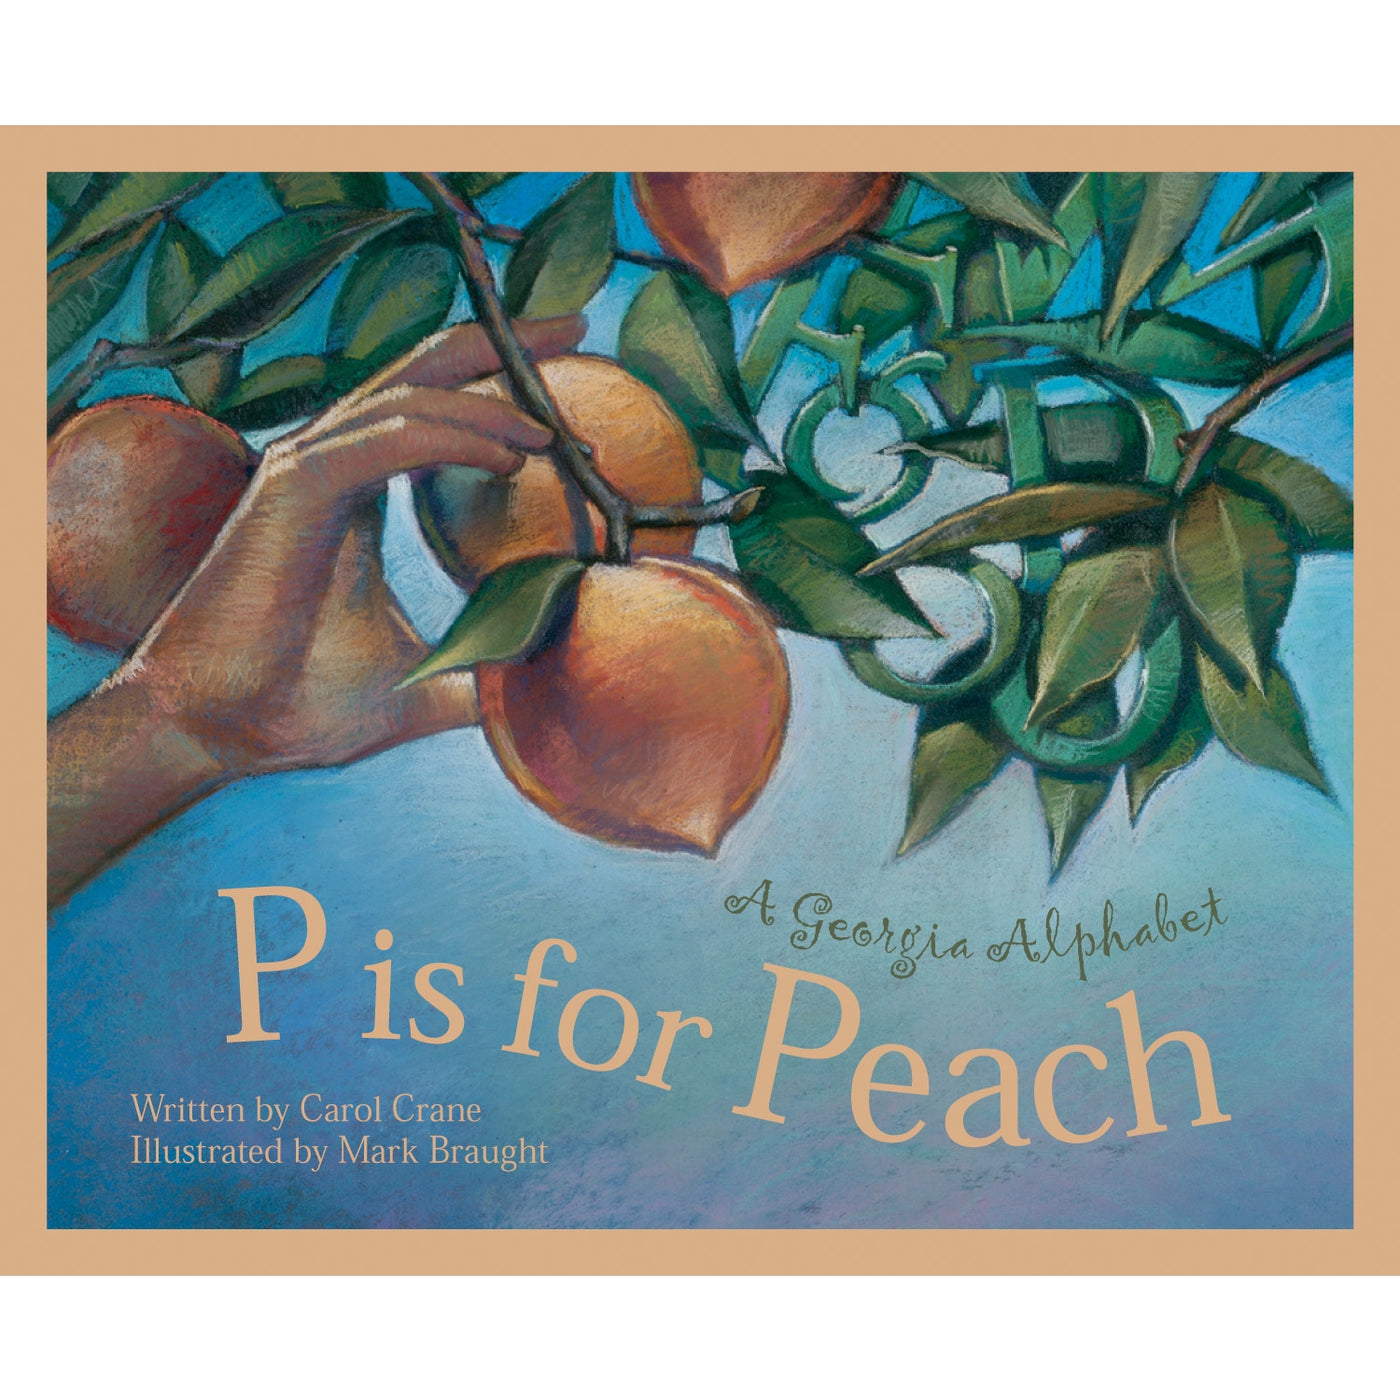 P is For Peach